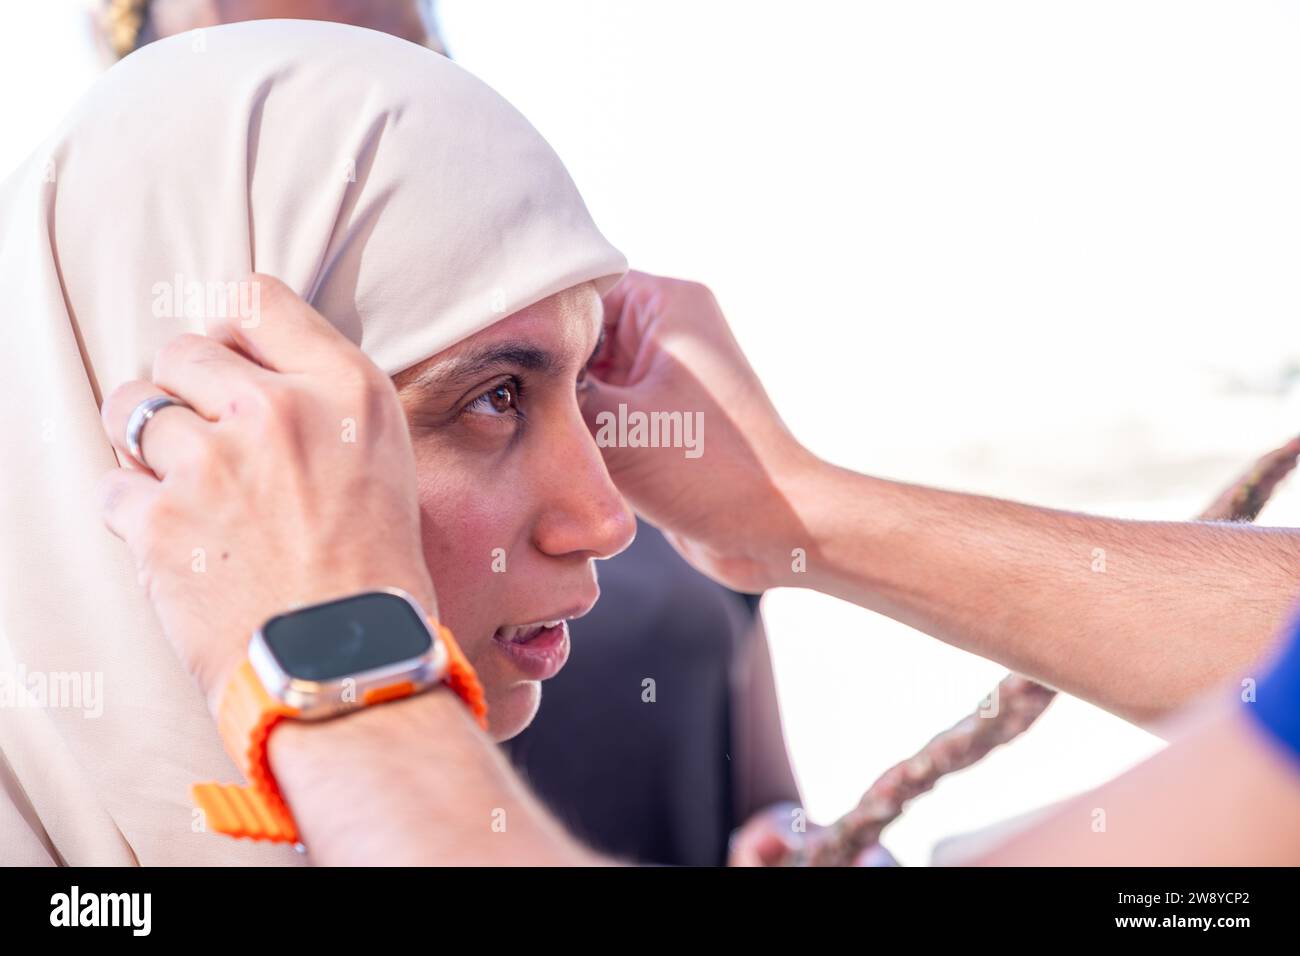 muslim female adjusting her hijab with a help  from other person Stock Photo